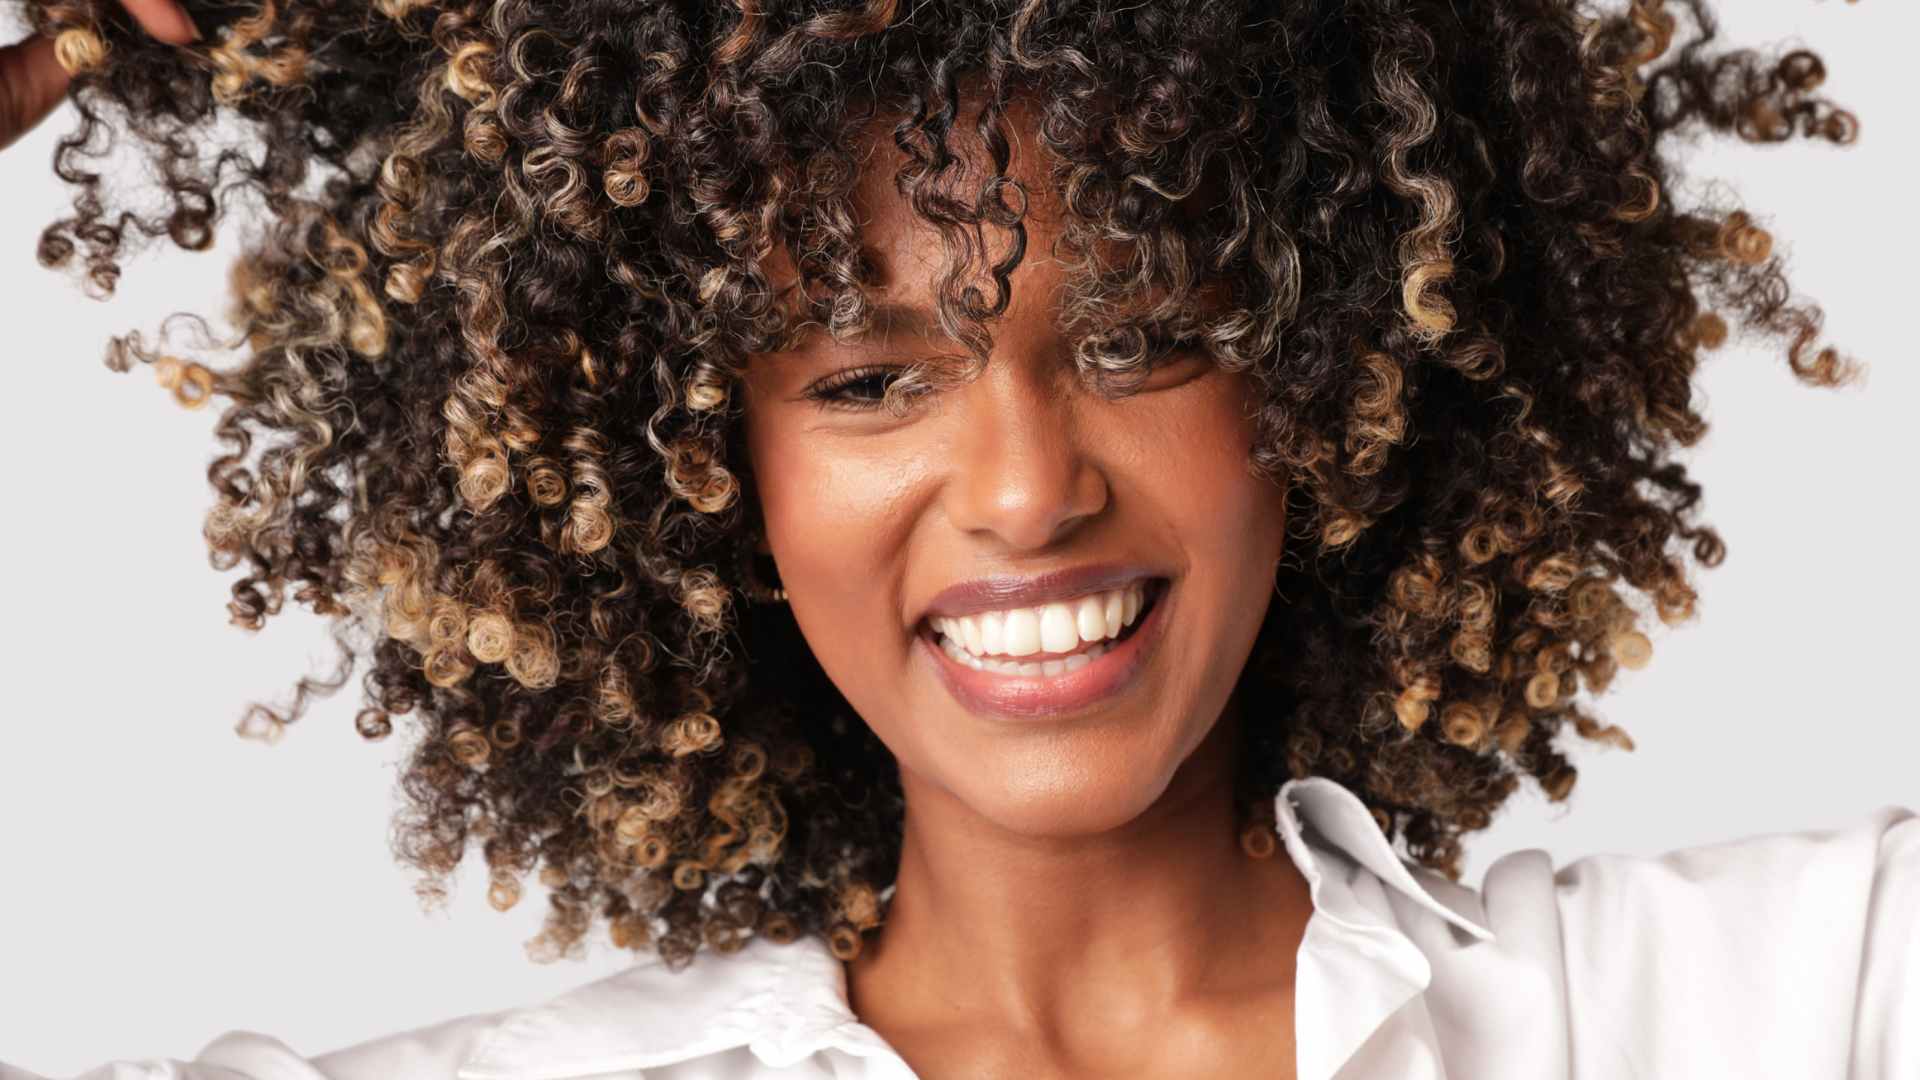 Portrait of joyful woman with afro hair smiling over white background. Isolated. High quality photo.